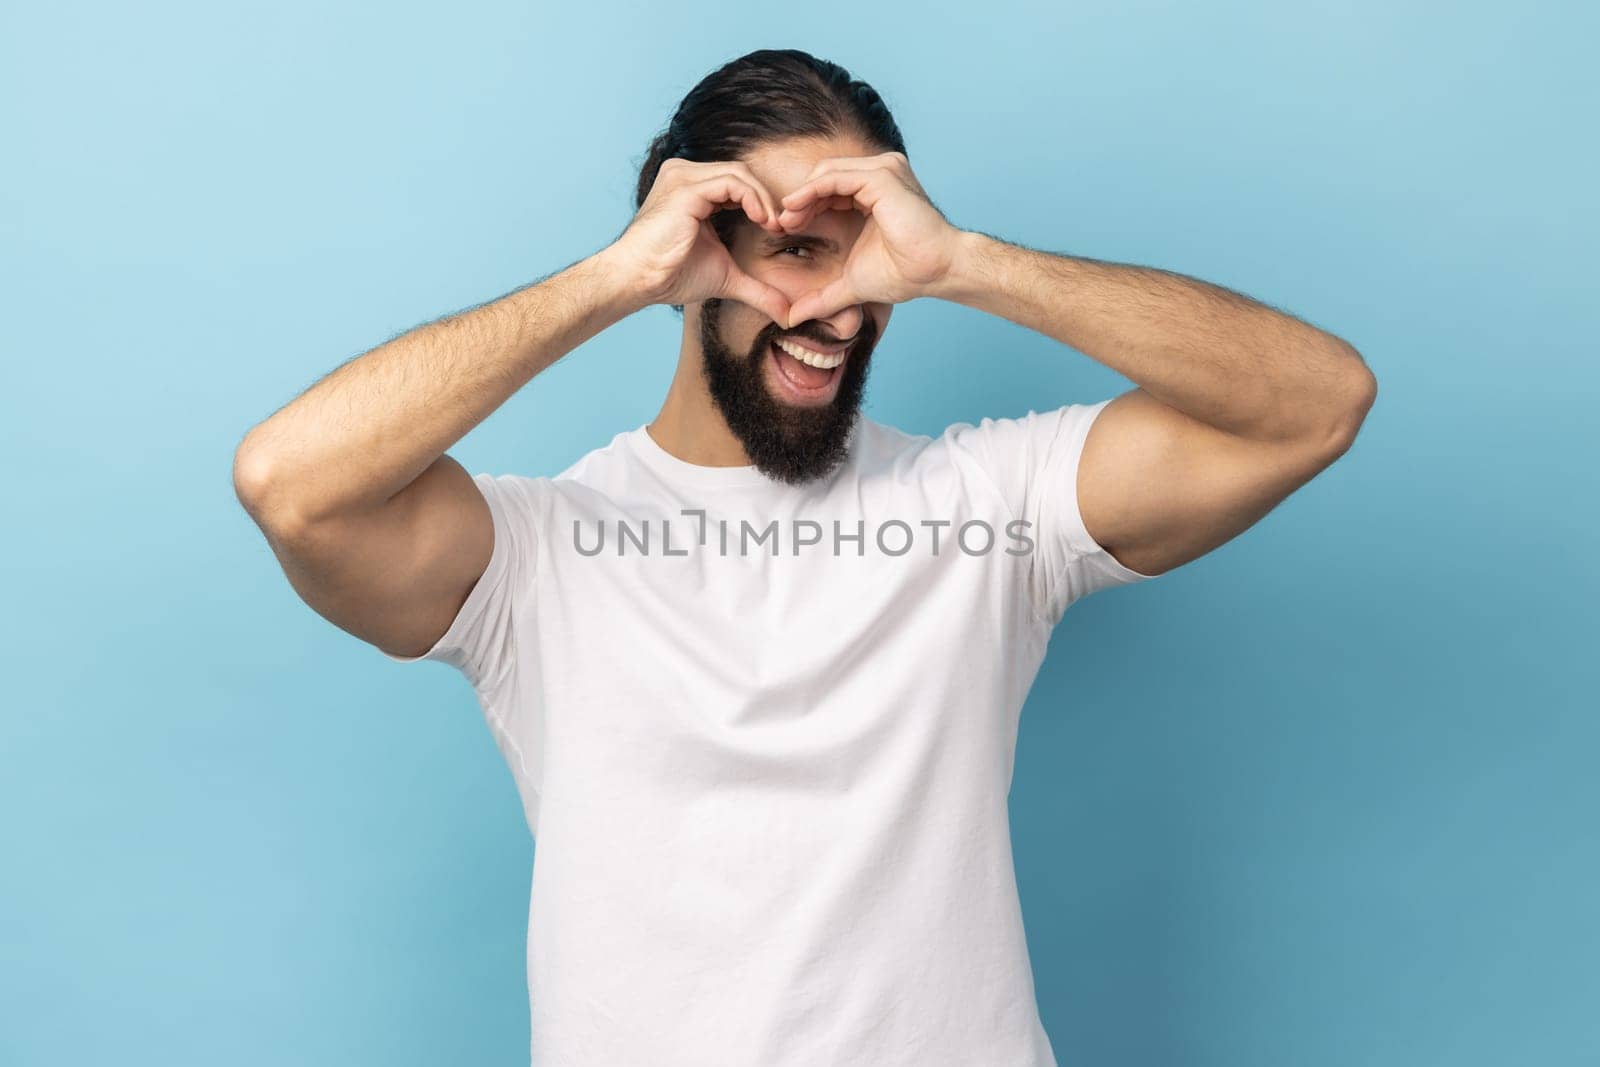 Man making heart gesture over mouth smiles toothily, expressing romantic feelings. by Khosro1